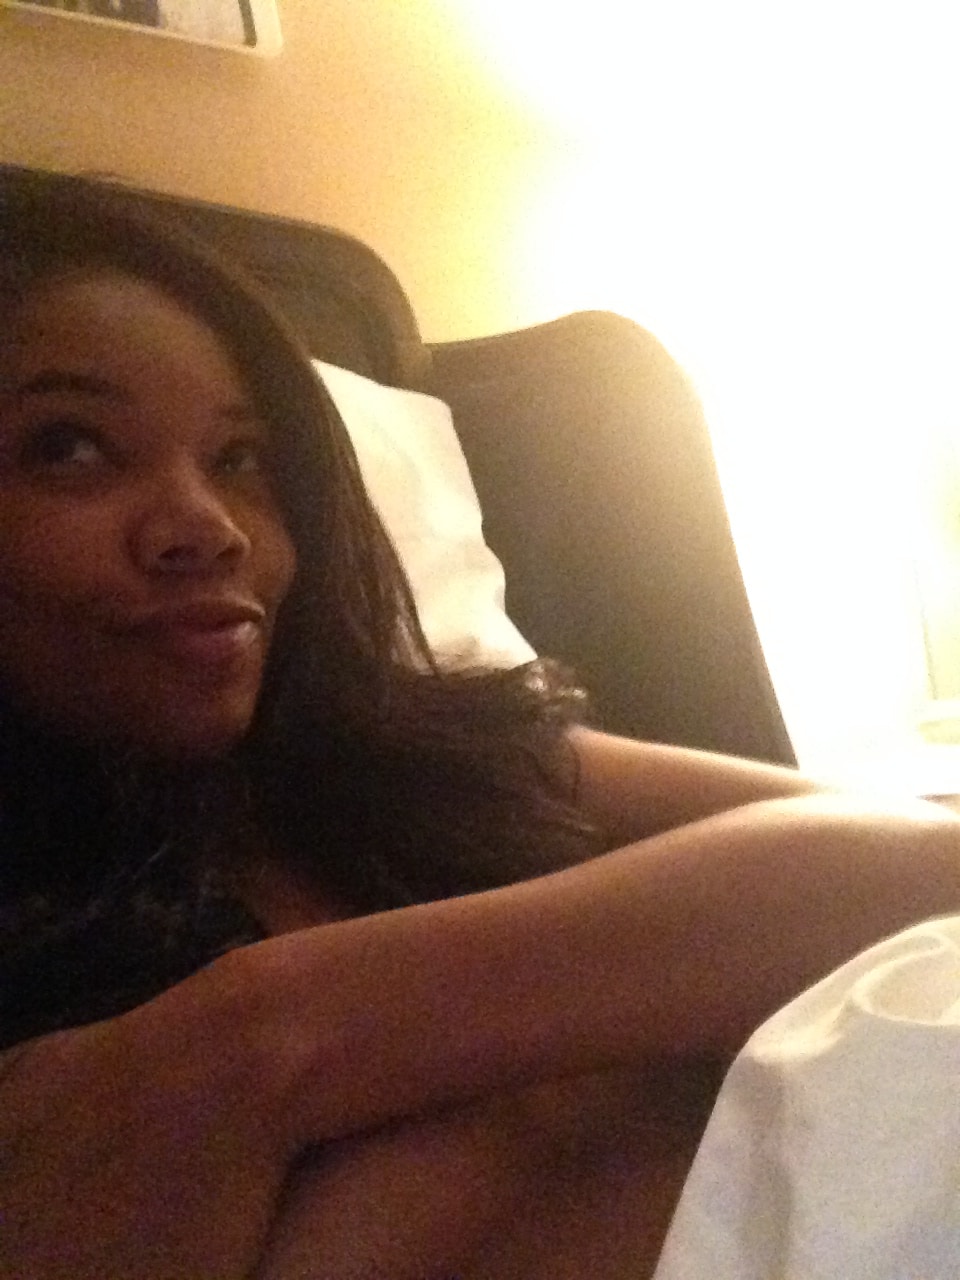 icloud leaked pic of actress gabrielle union in bed topless